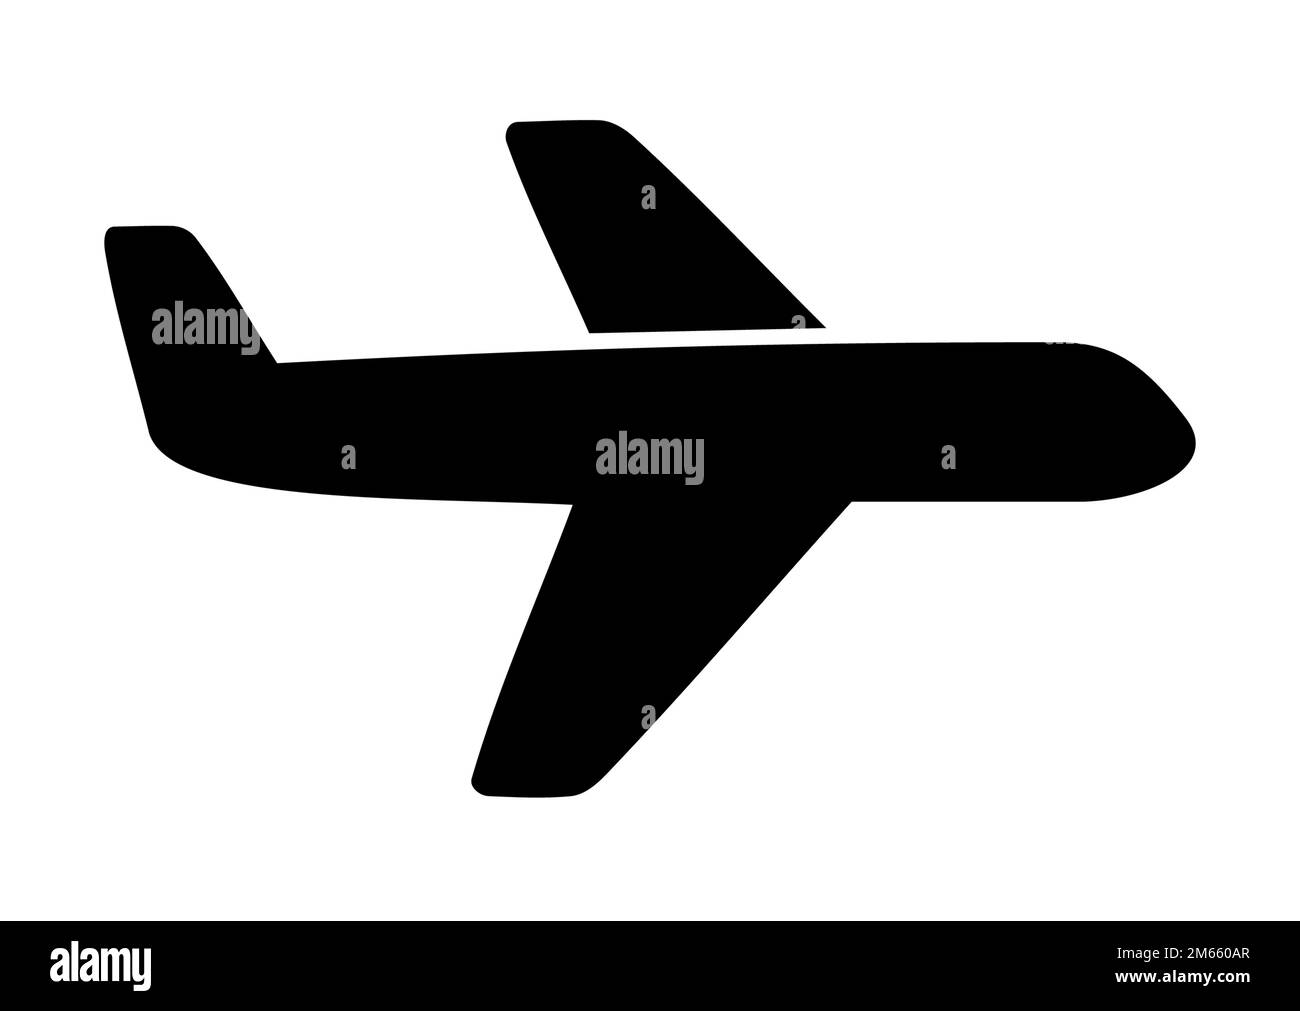 PROFILE AIRCRAFT PICTOGRAM, AIRPLANE SILHOUETTE IN BLACK COLOR Stock Vector